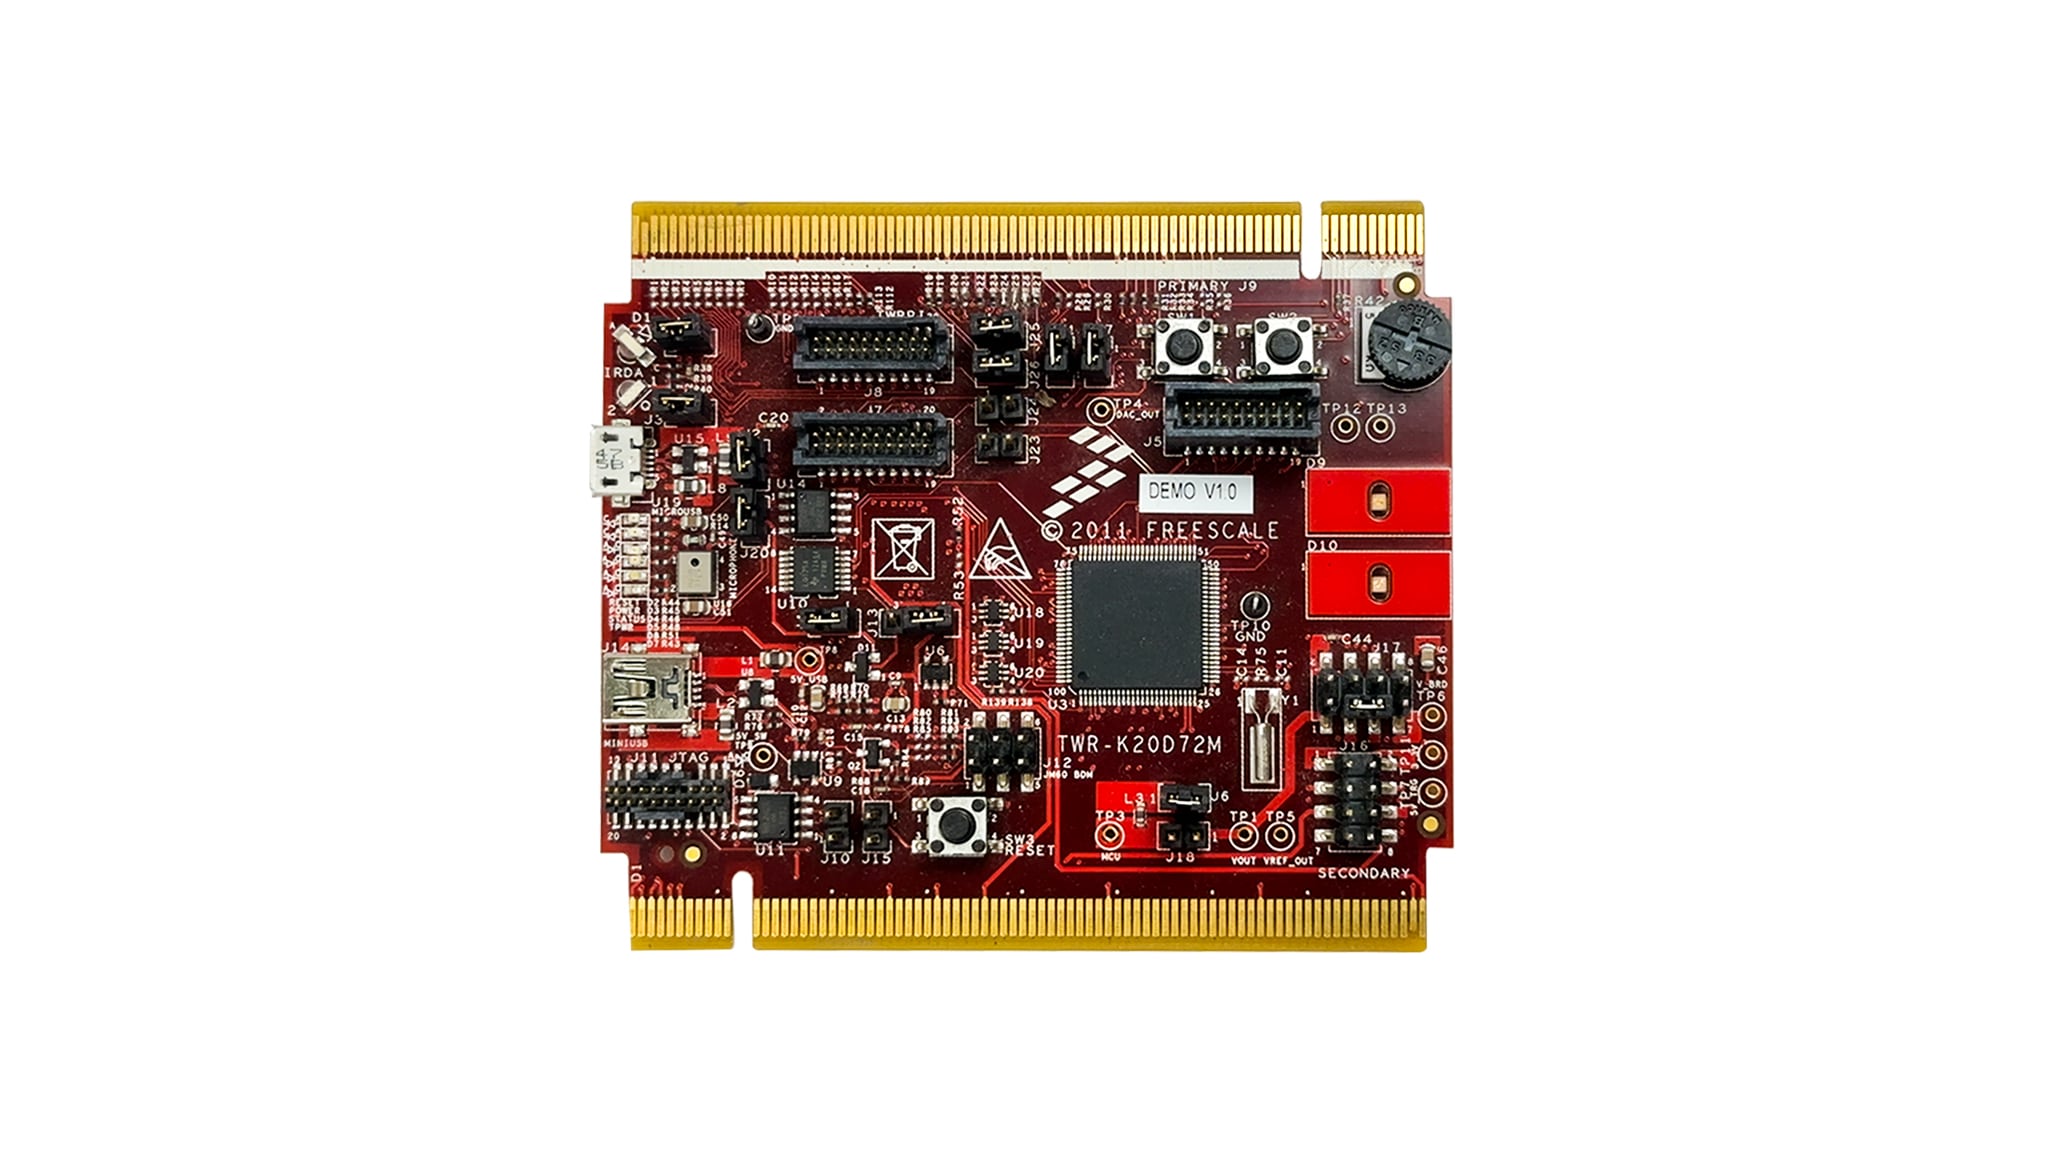 Freescale Tower TWR-K20D72M Evaluation Board